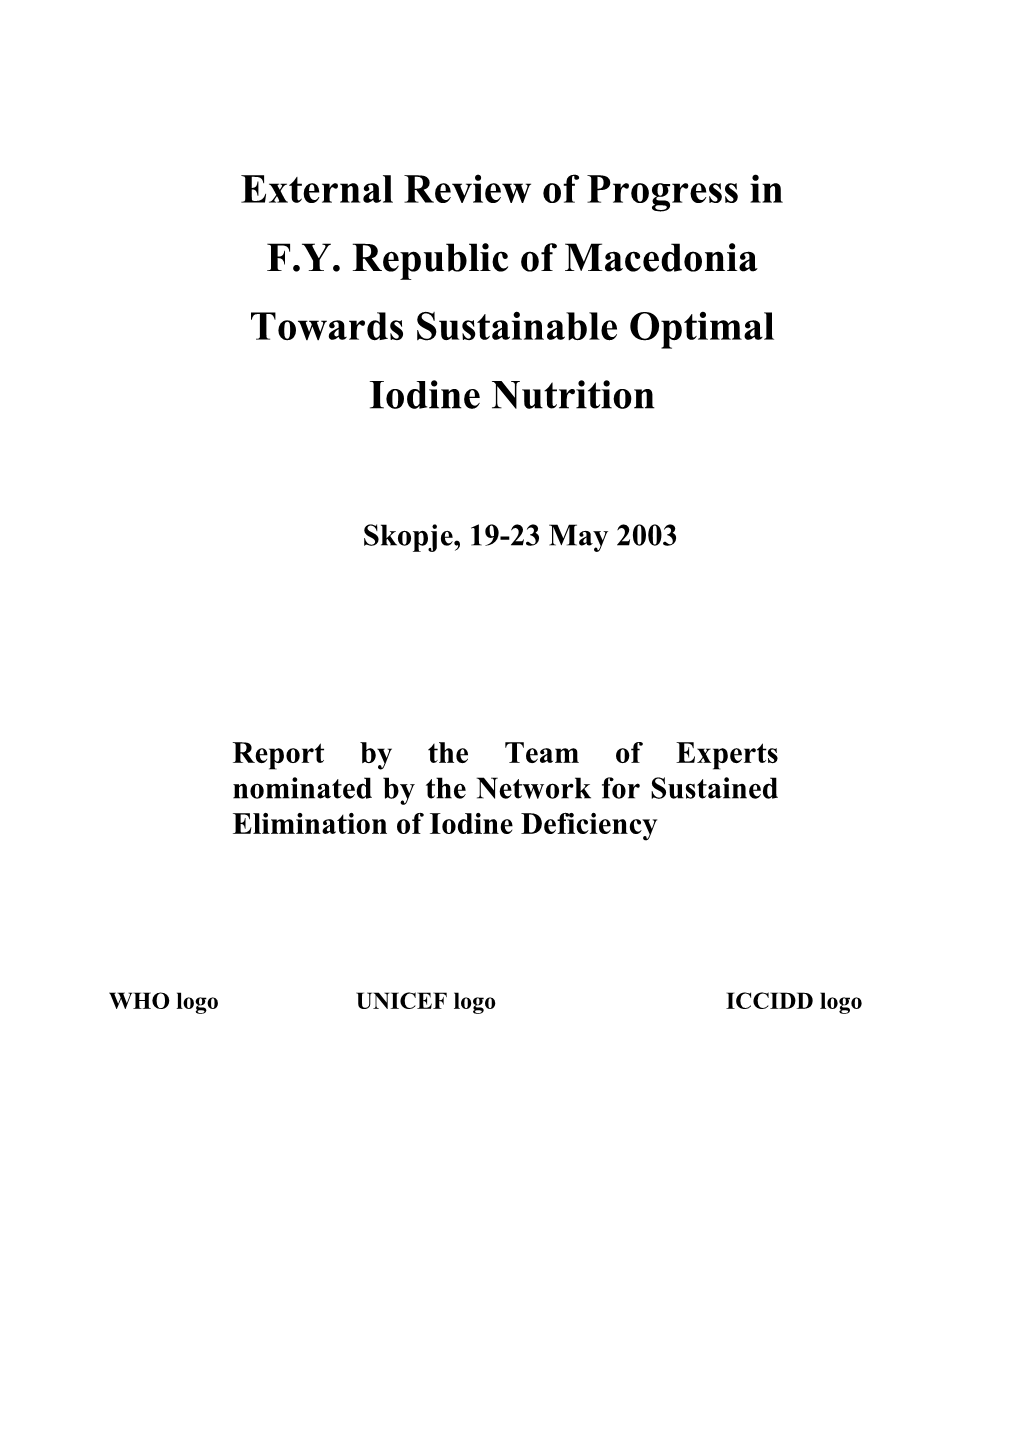 External Review of Progress in F.Y. Republic of Macedonia Towards Sustainable Optimal